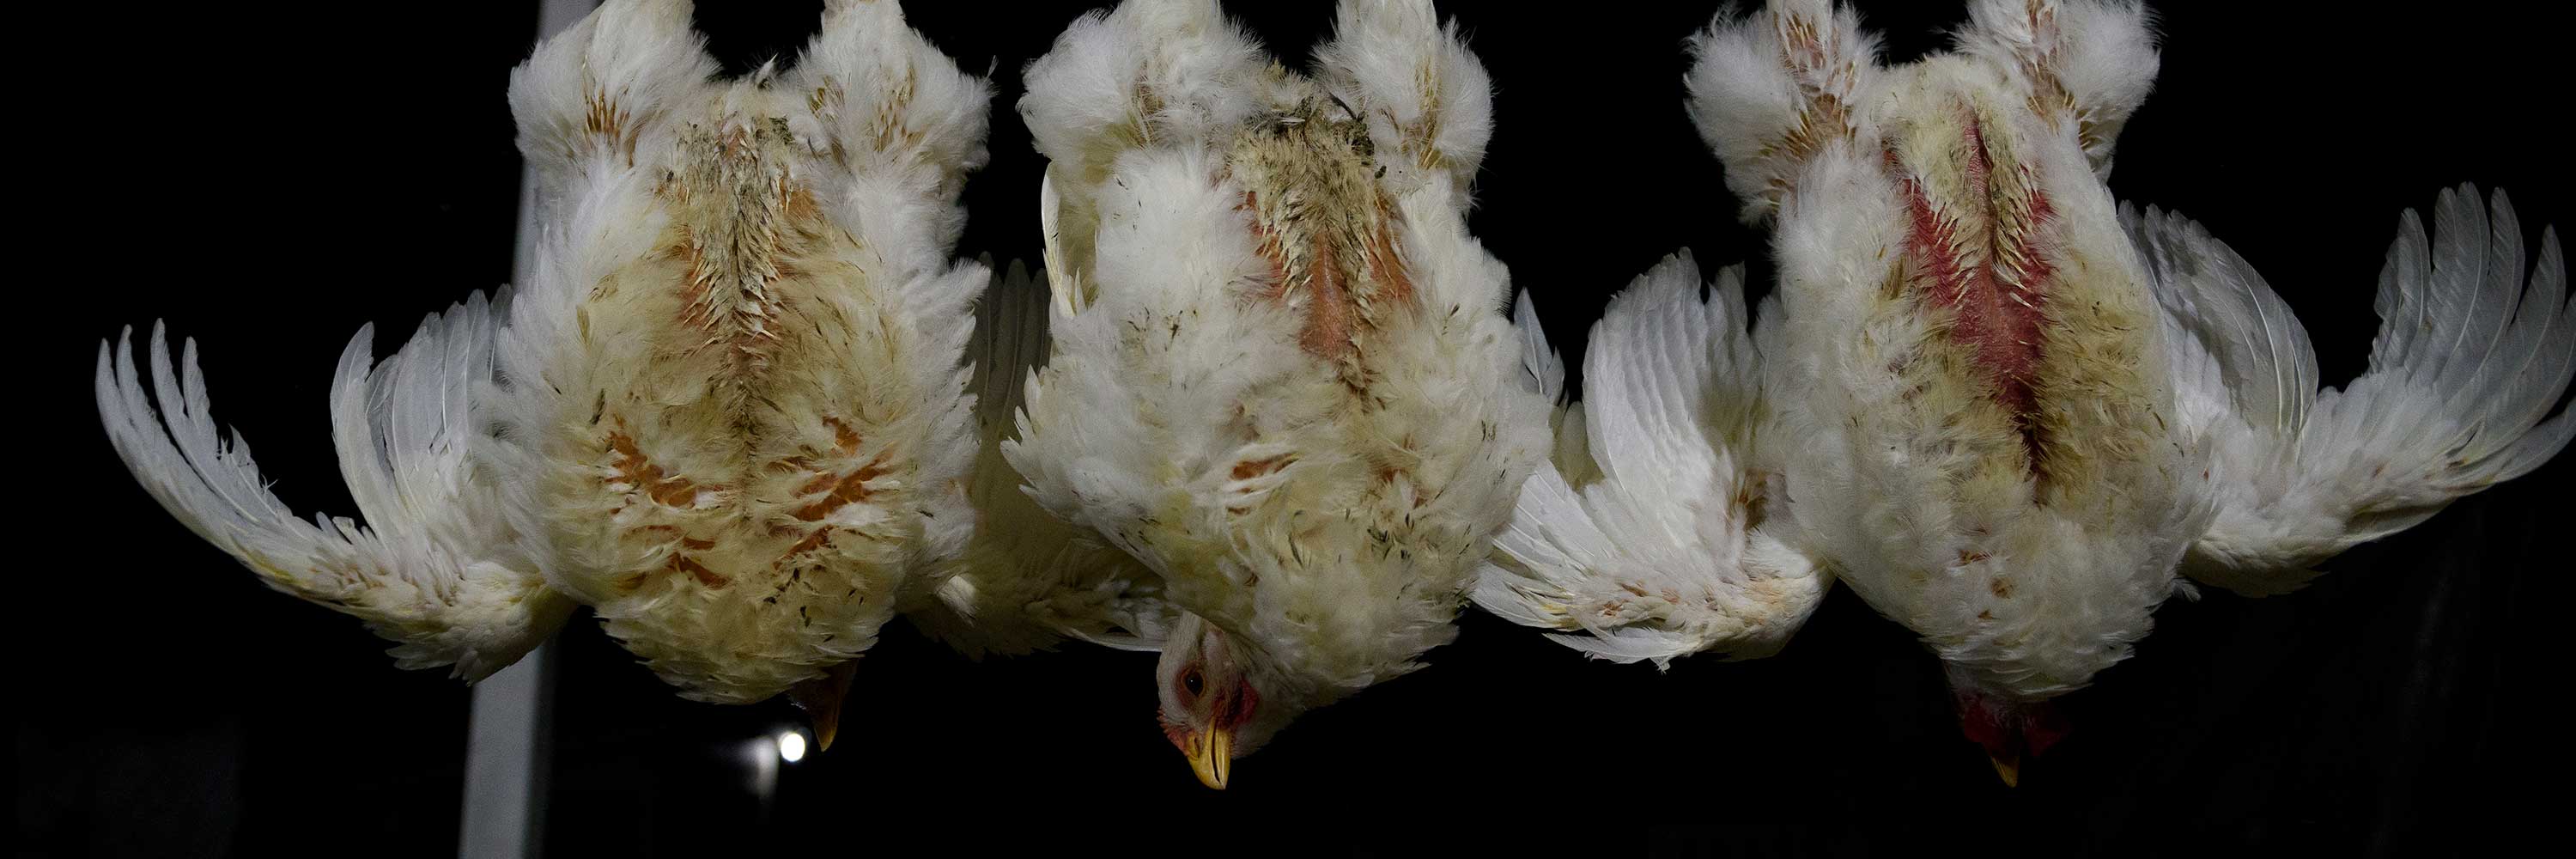 Chickens in slaughterhouse hung upside down